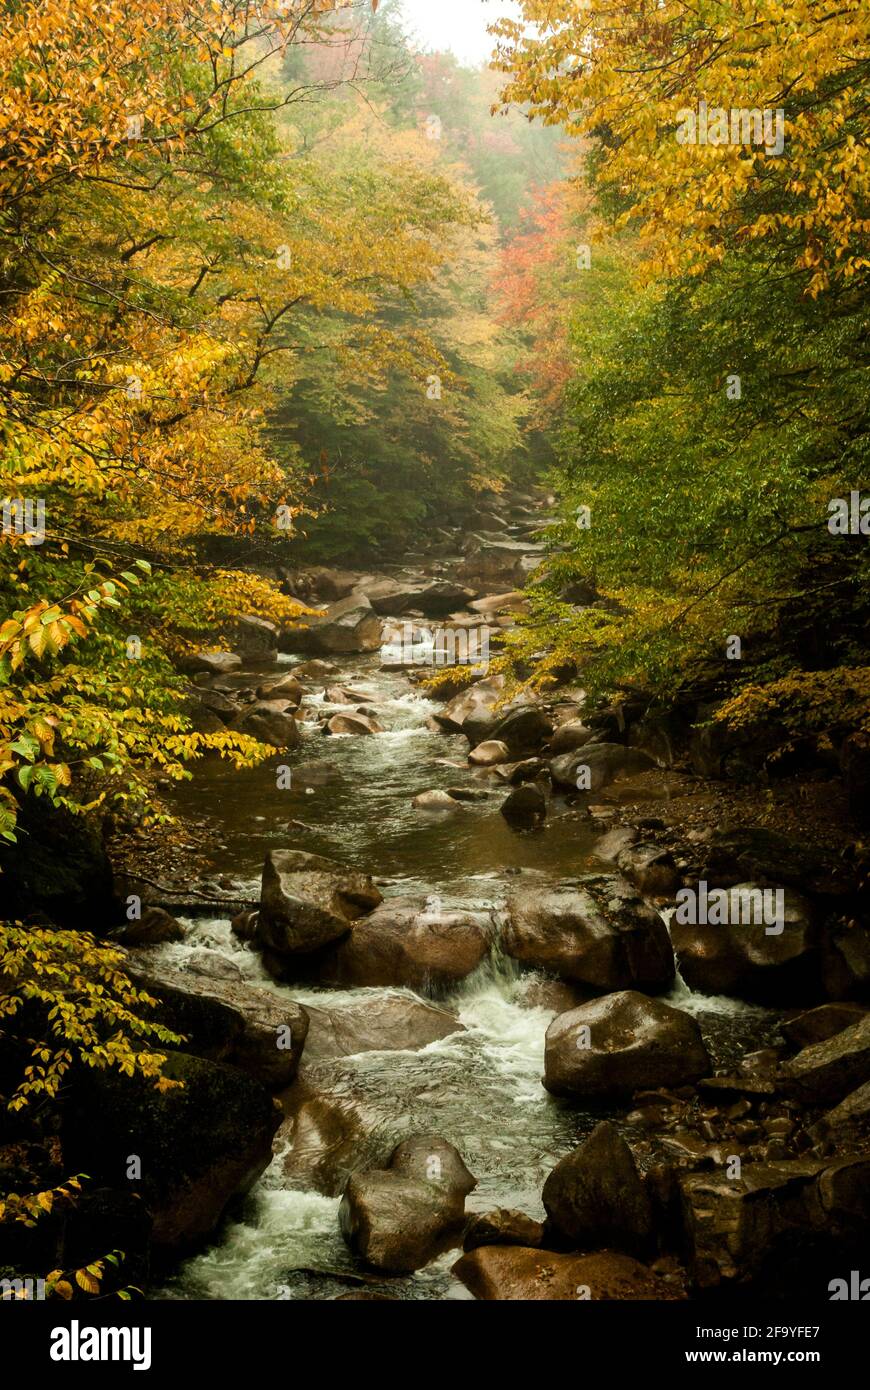 The Pemigewasset River in Franconia Notch State Park, New Hampshire, USA on a rainy day in autumn / fall. Stock Photo